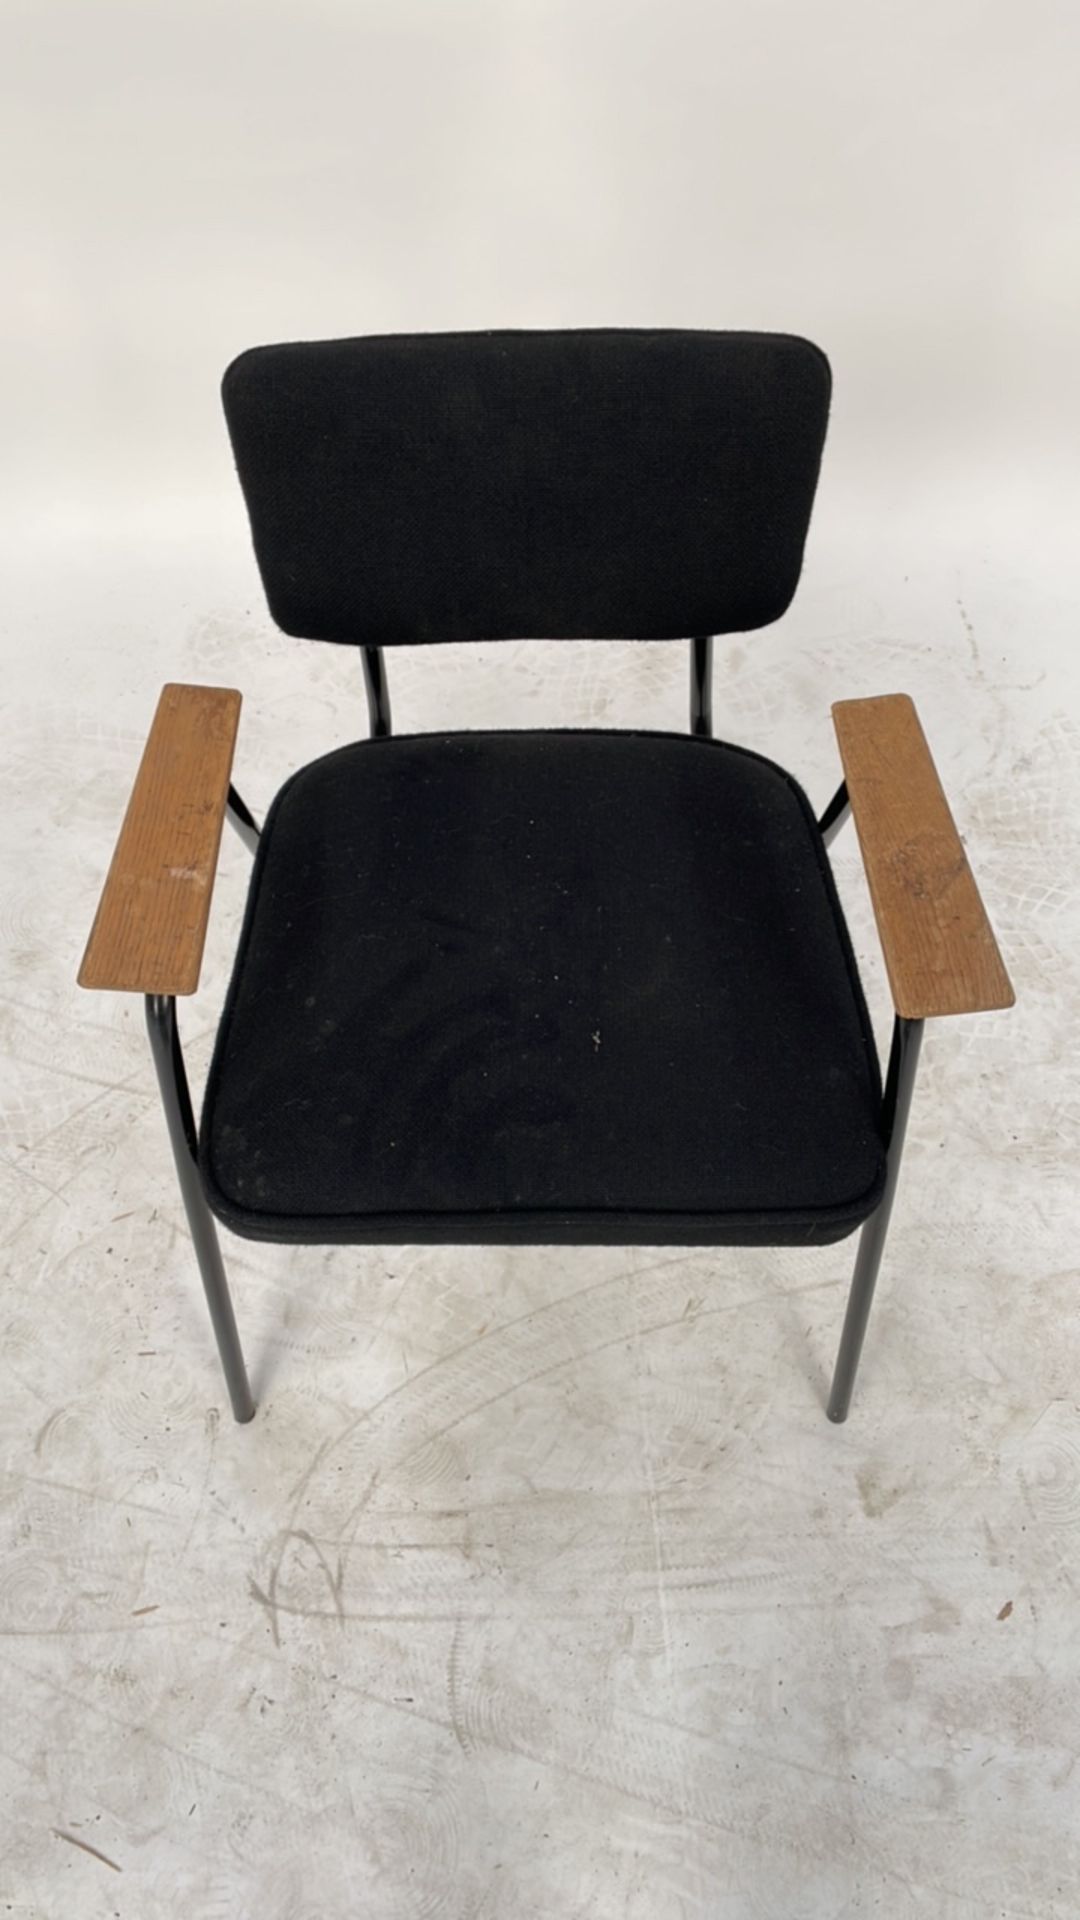 Black Commercial Grade Chair with wooden armrest - Image 2 of 2